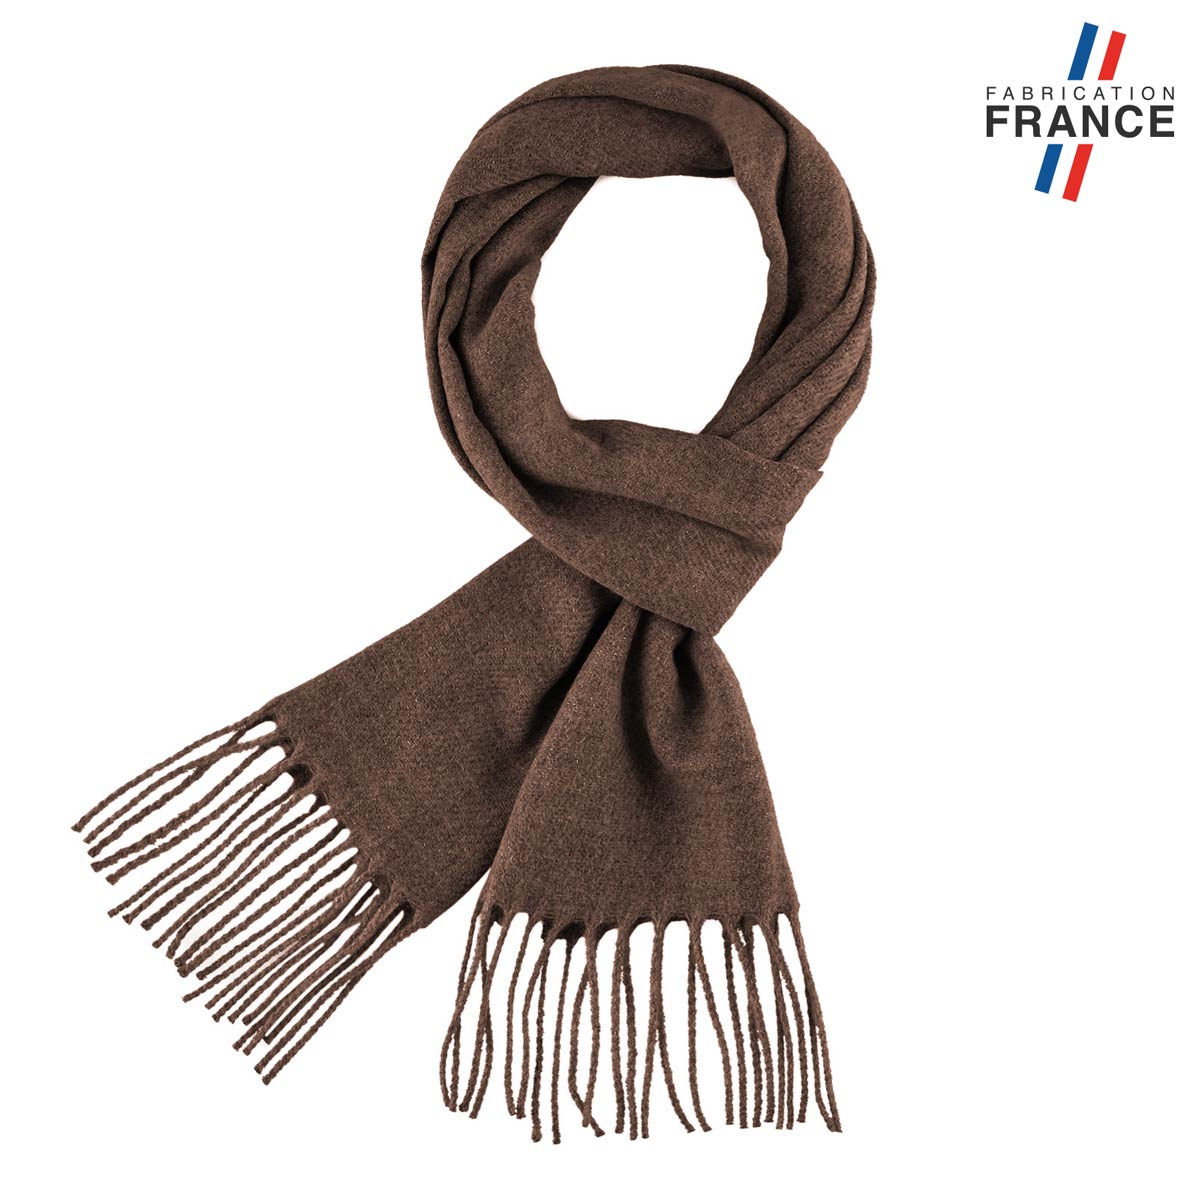 AT-06574_F12-1FR_Echarpe-franges-taupe-chine-fabrication-francaise